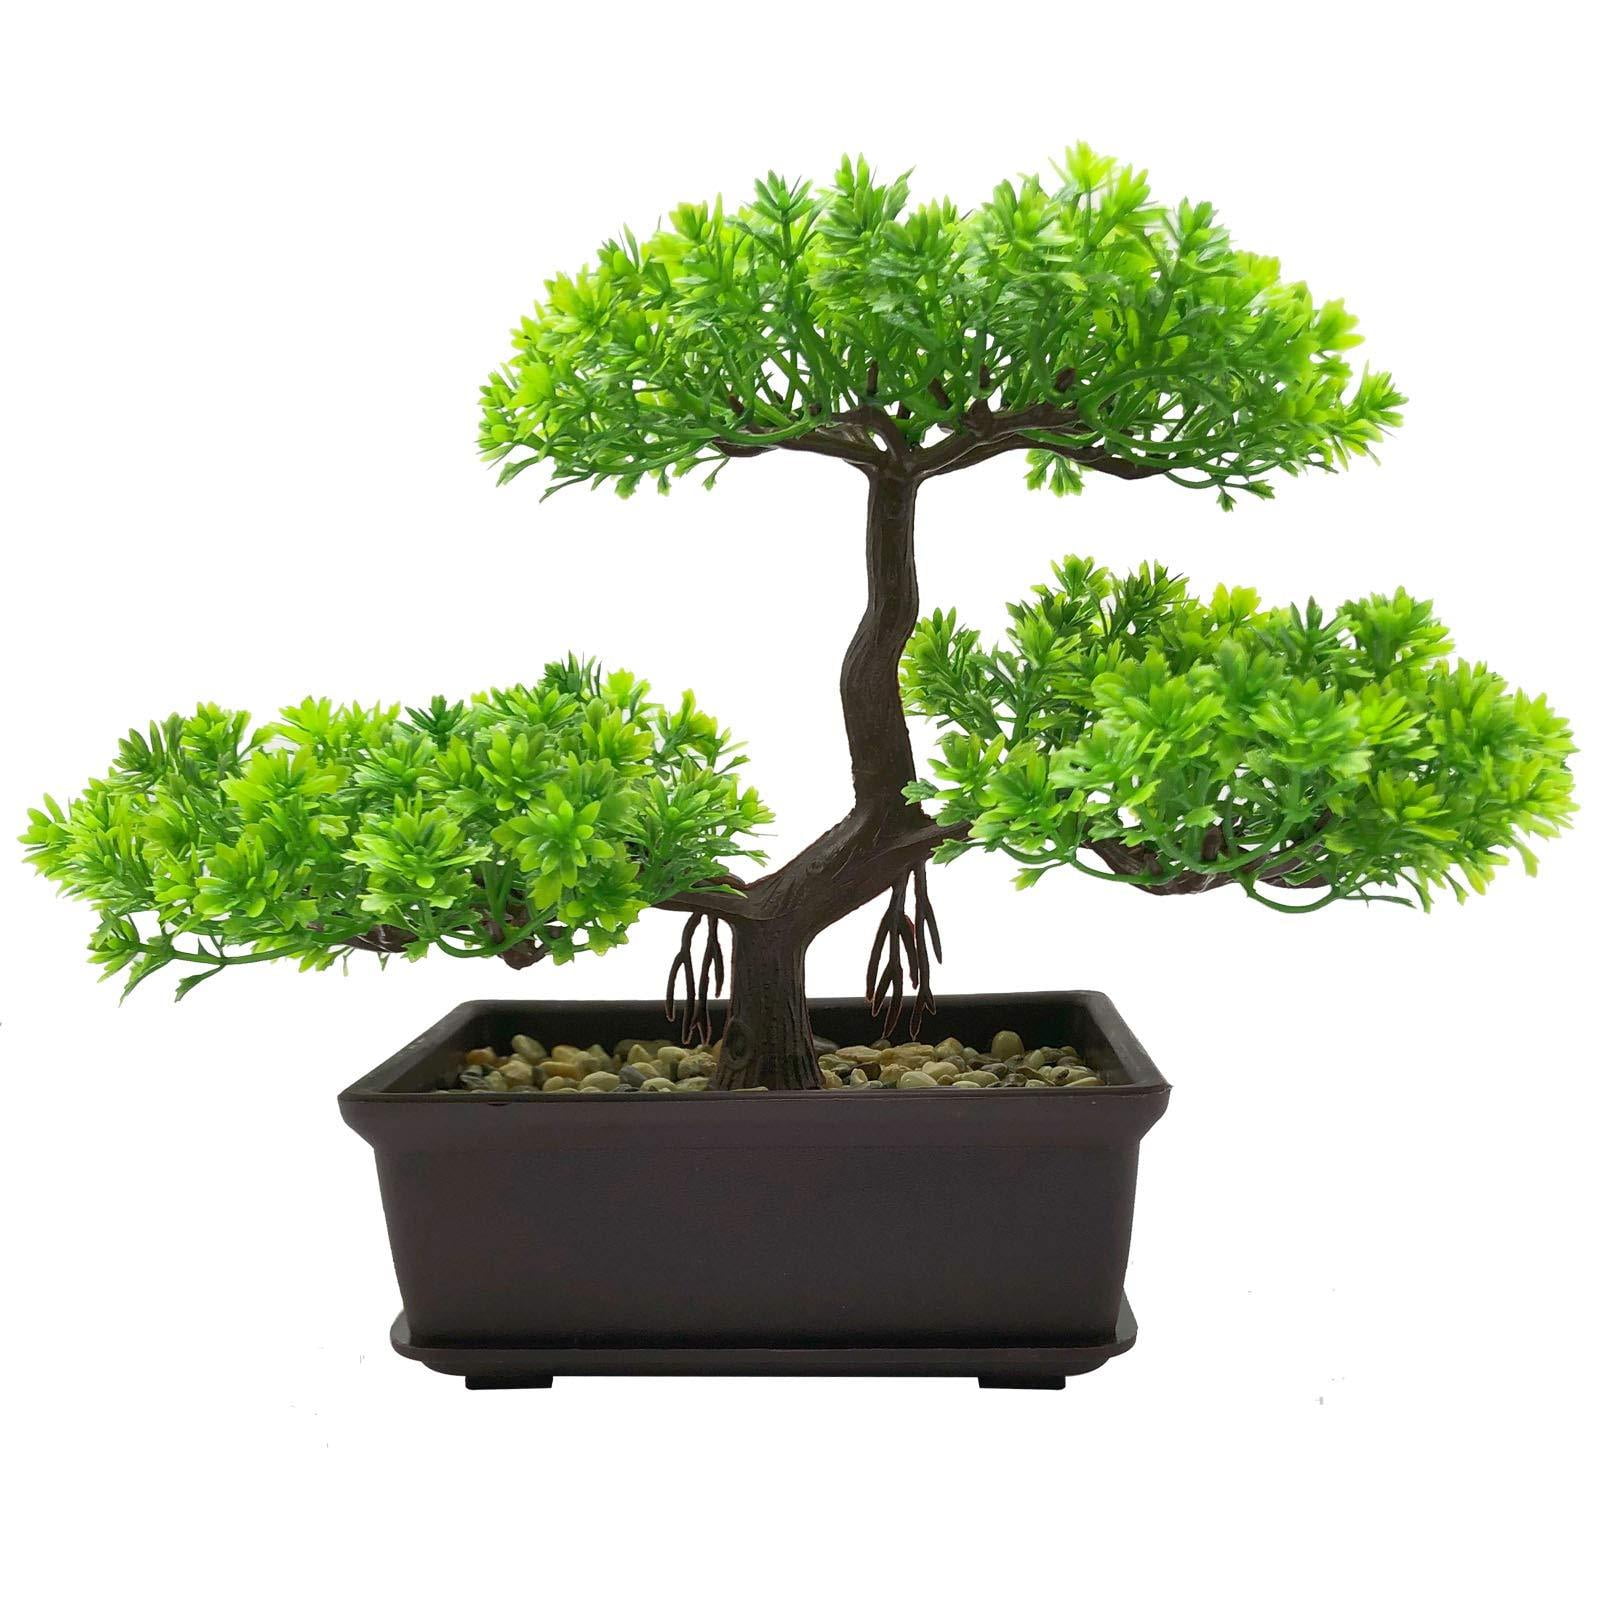 Artificial Bonsai Tree Fake Plant Decoration Potted Green House Plants Display 